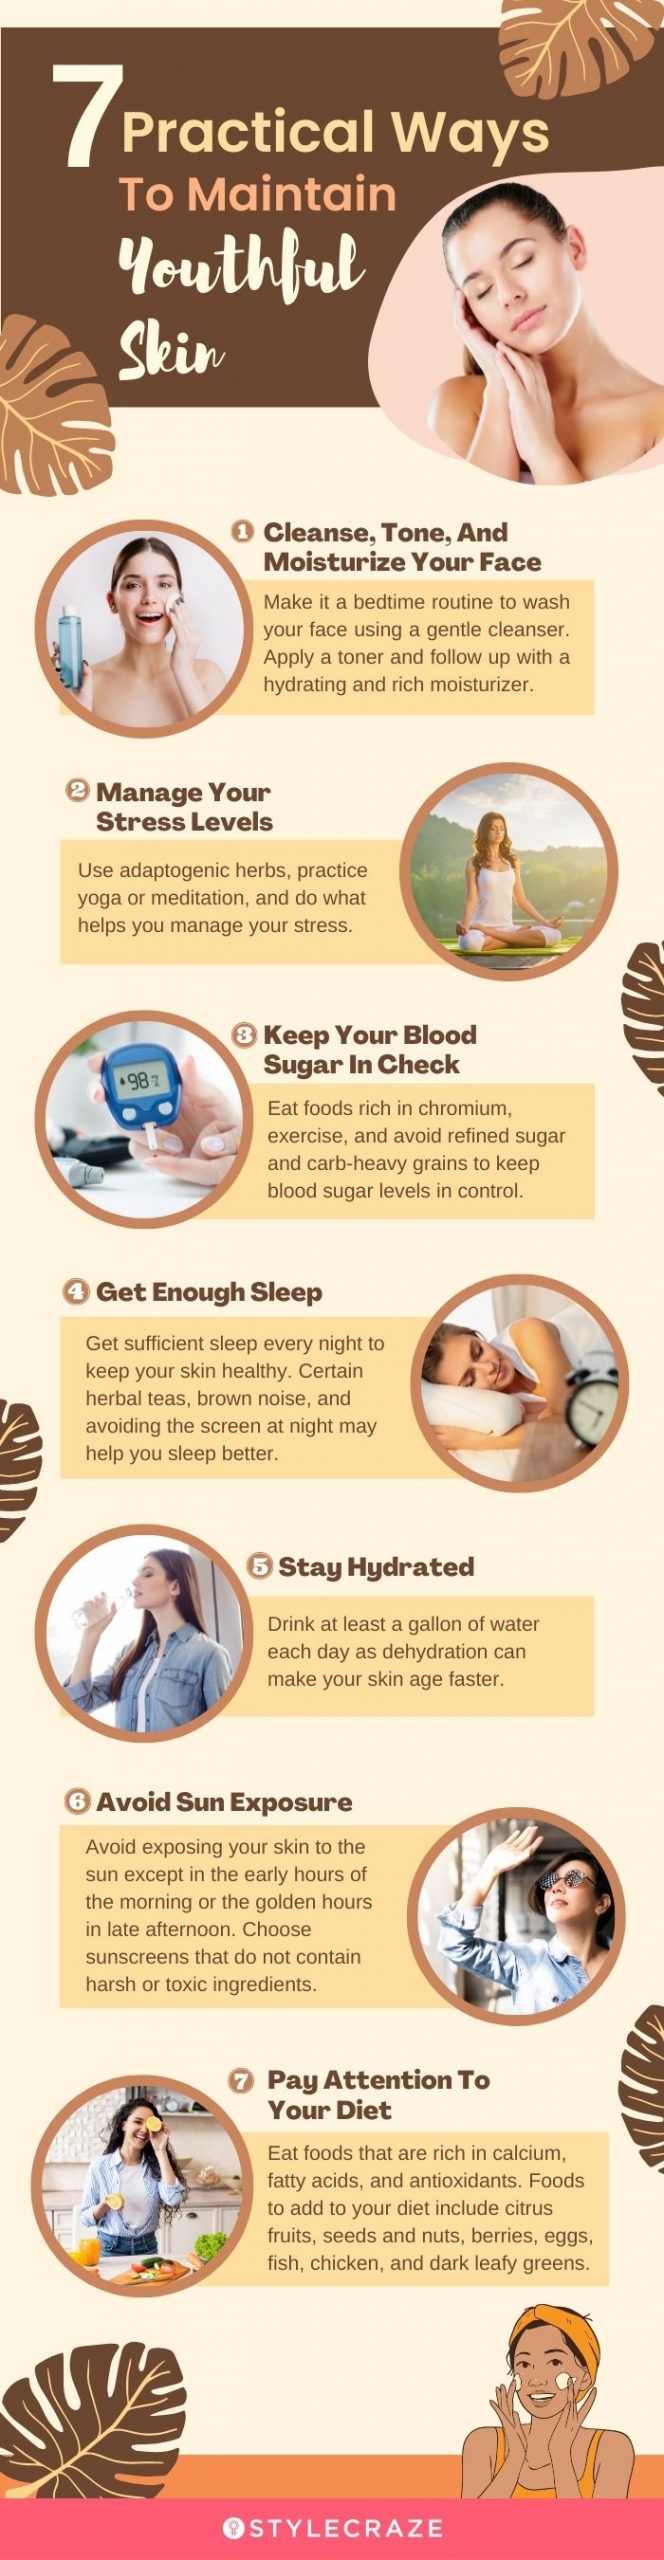 practical ways to maintain youthful skin (infographic)